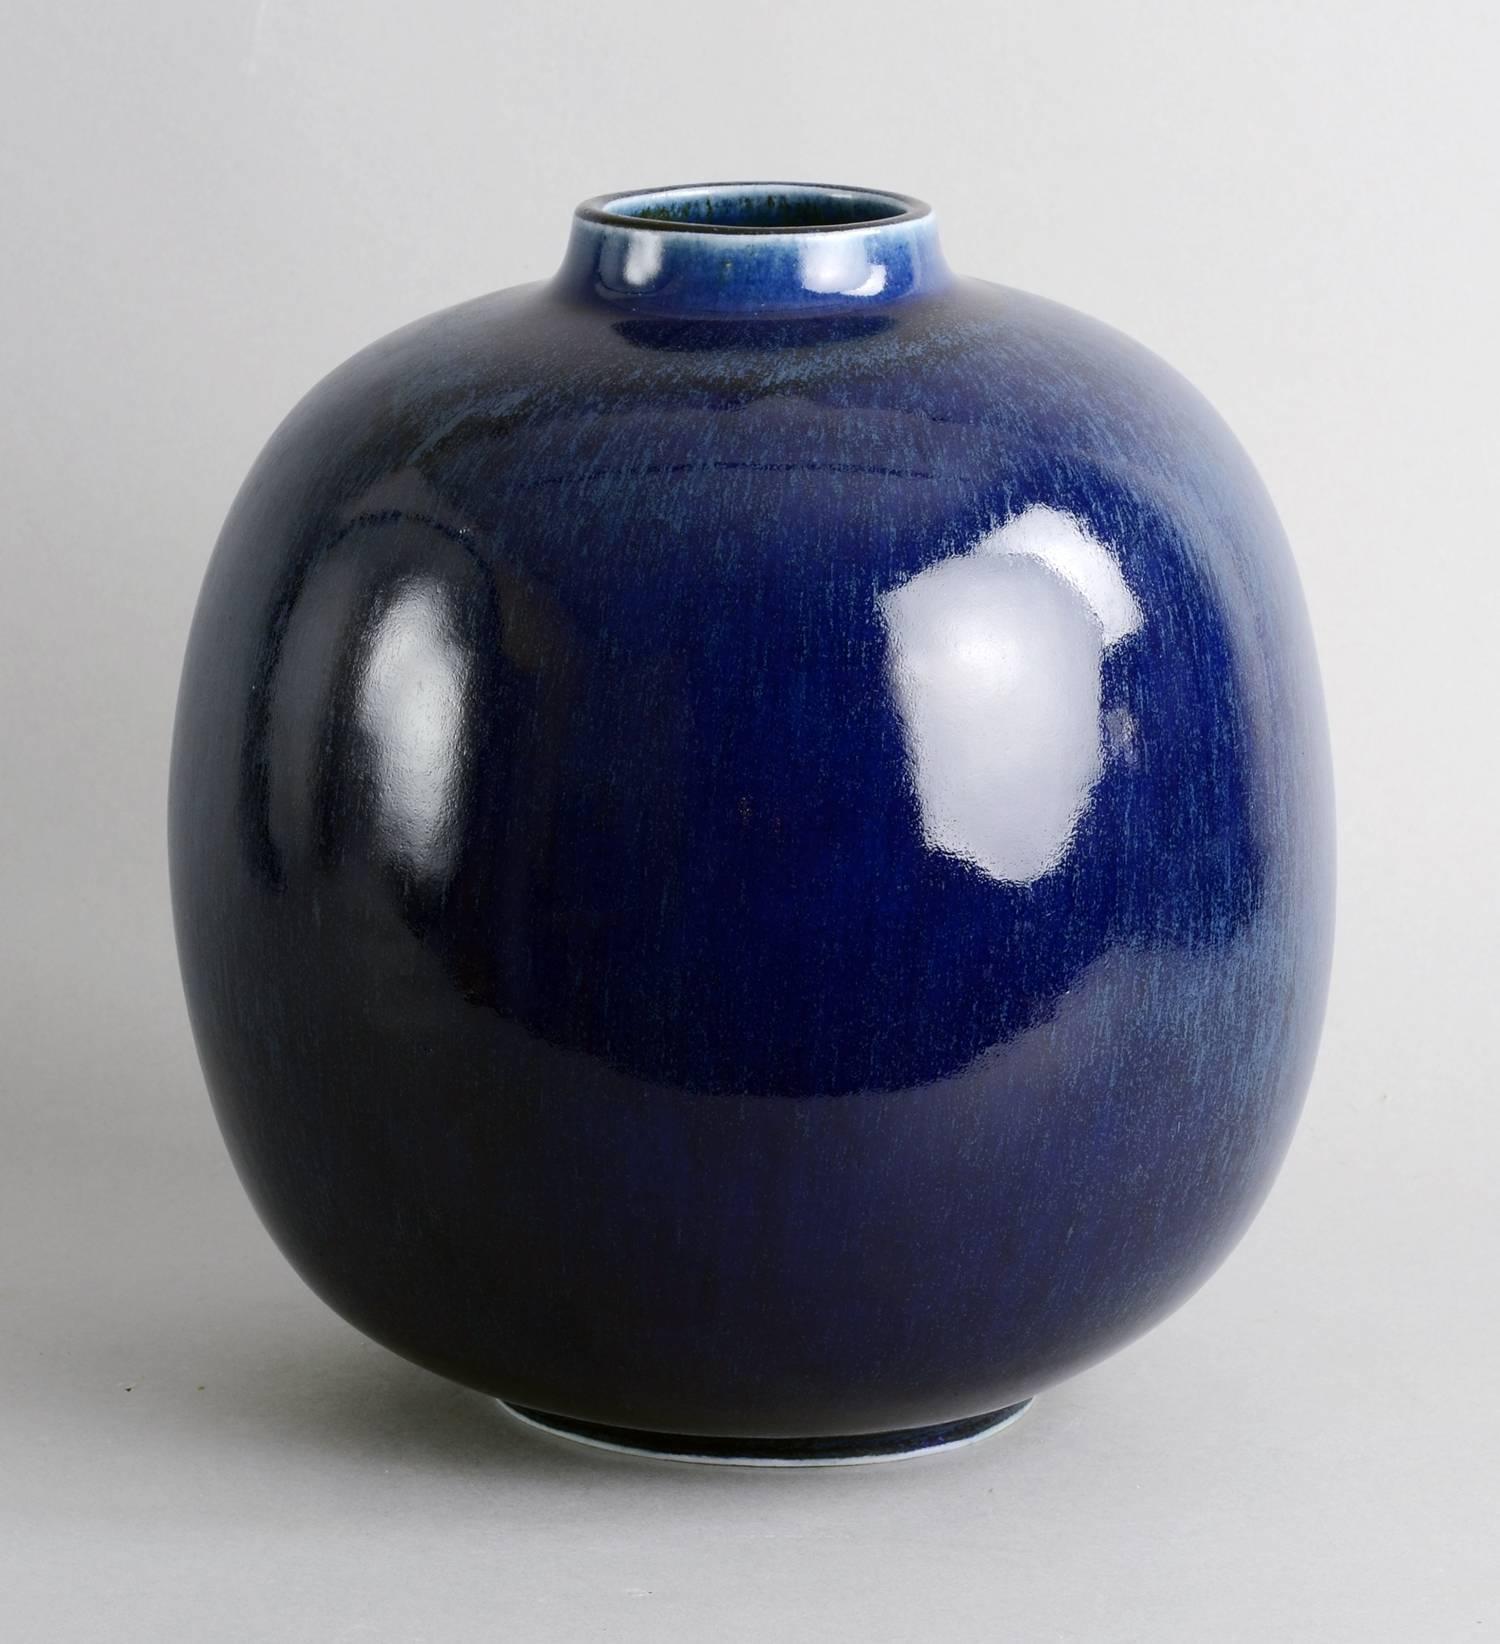 Eva Staehr Nielsen for Saxbo, Denmark.
Large stoneware vase with glossy and matte dark blue haresfur glaze, circa 1940s.
Measures: Height 10 1/2